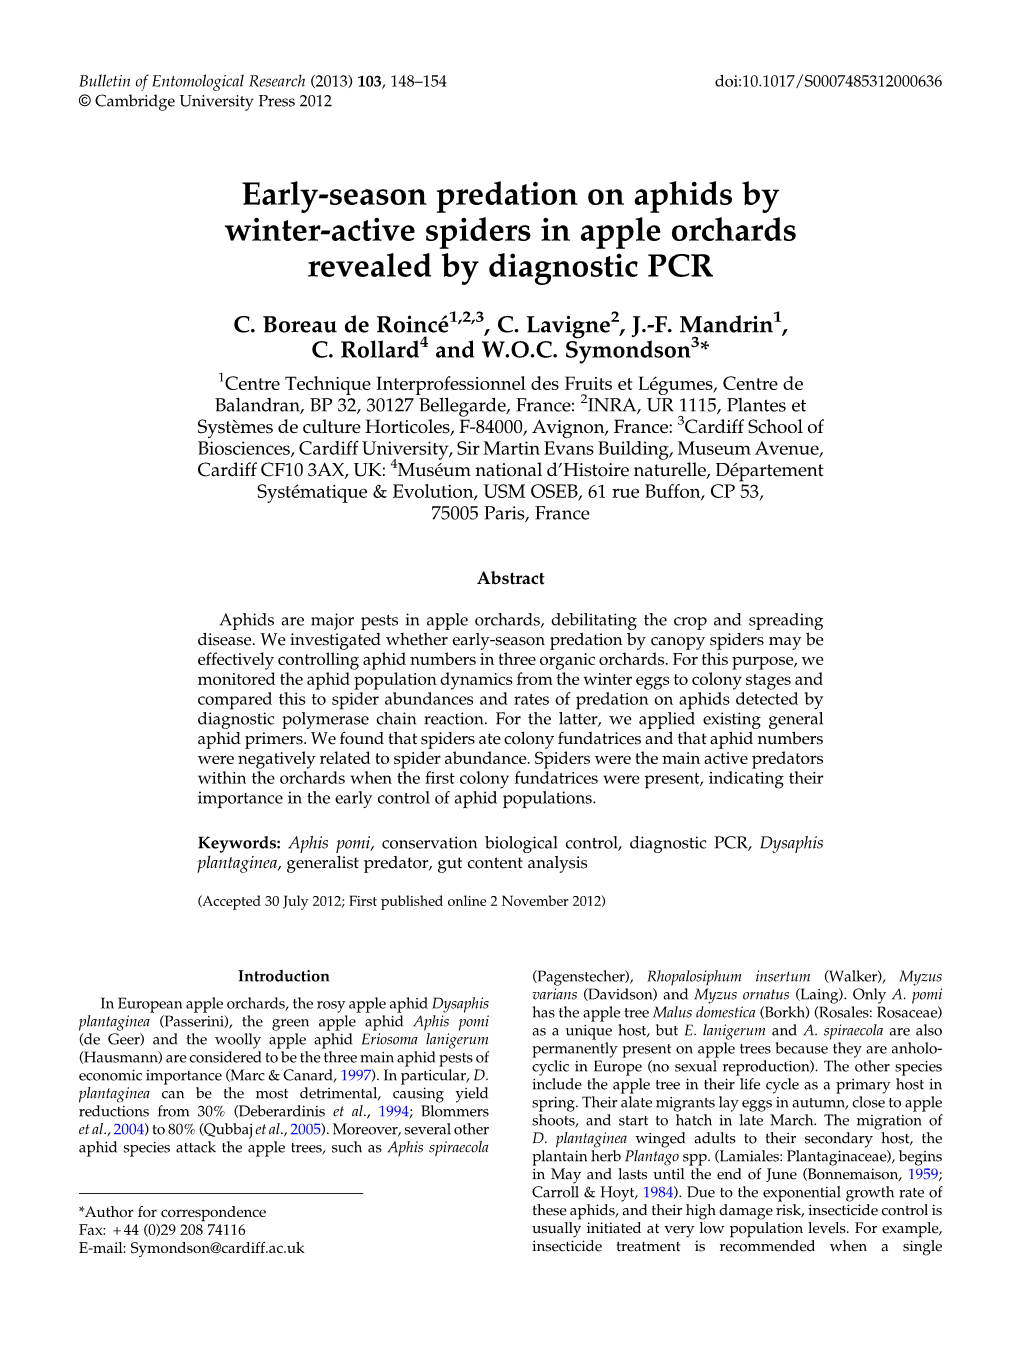 Early-Season Predation on Aphids by Winter-Active Spiders in Apple Orchards Revealed by Diagnostic PCR